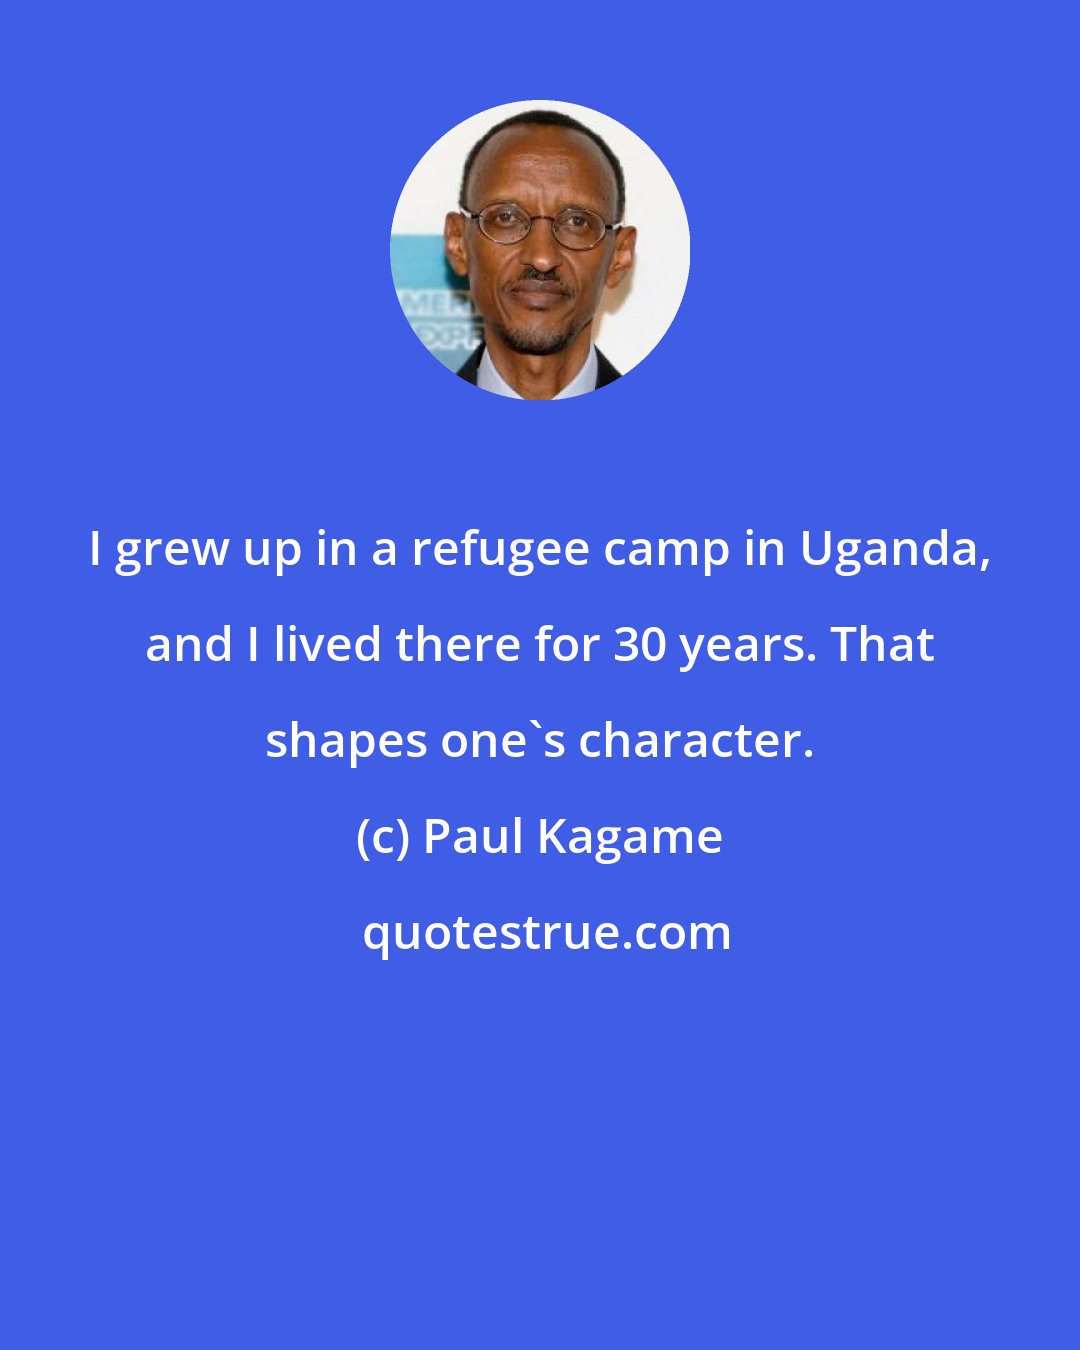 Paul Kagame: I grew up in a refugee camp in Uganda, and I lived there for 30 years. That shapes one's character.